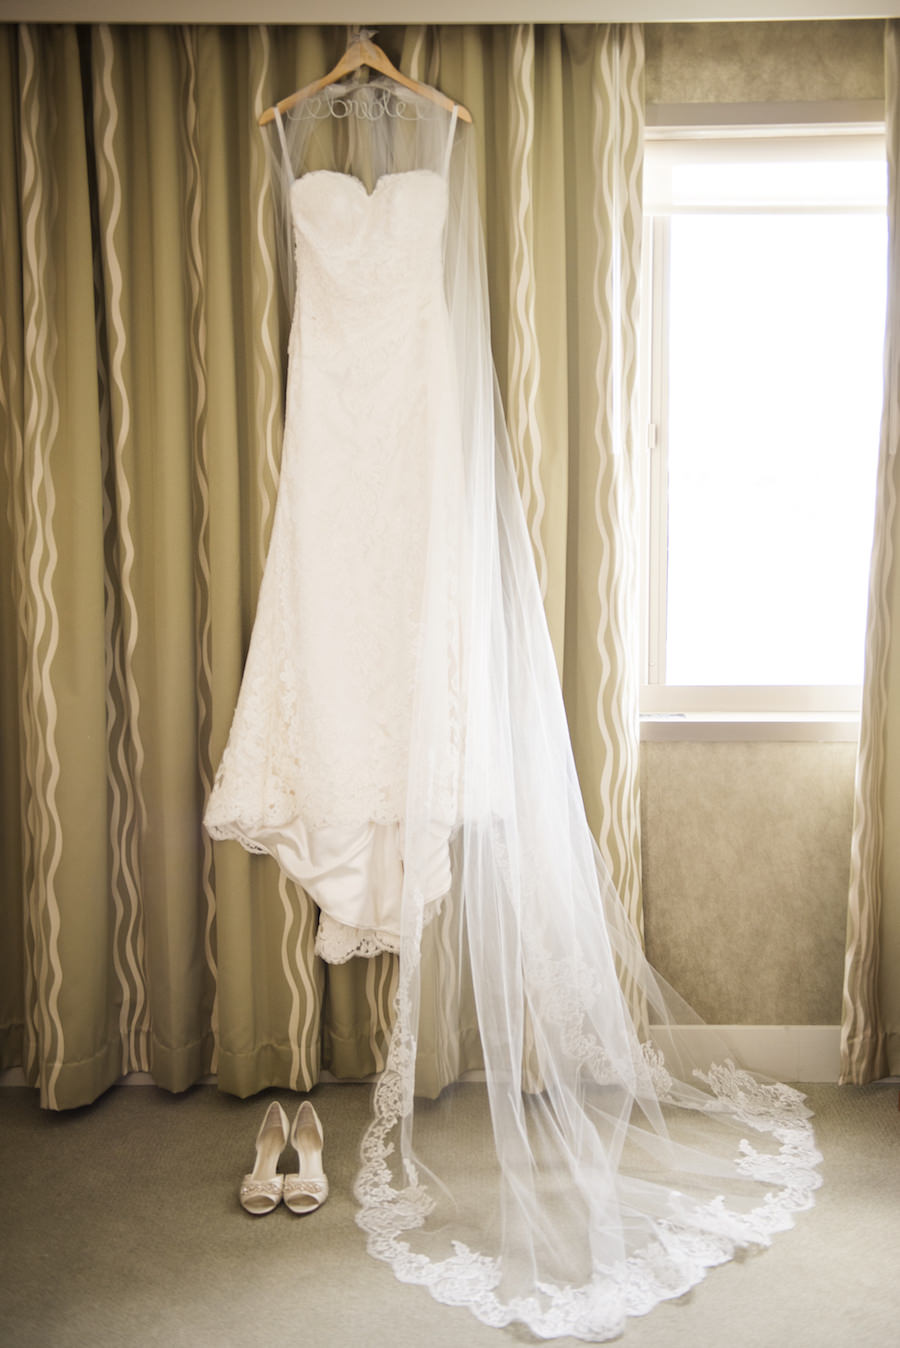 White, Strapless Lace Wedding Gown, Lace Trim Veil, and White Wedding Shoes for Tampa Wedding